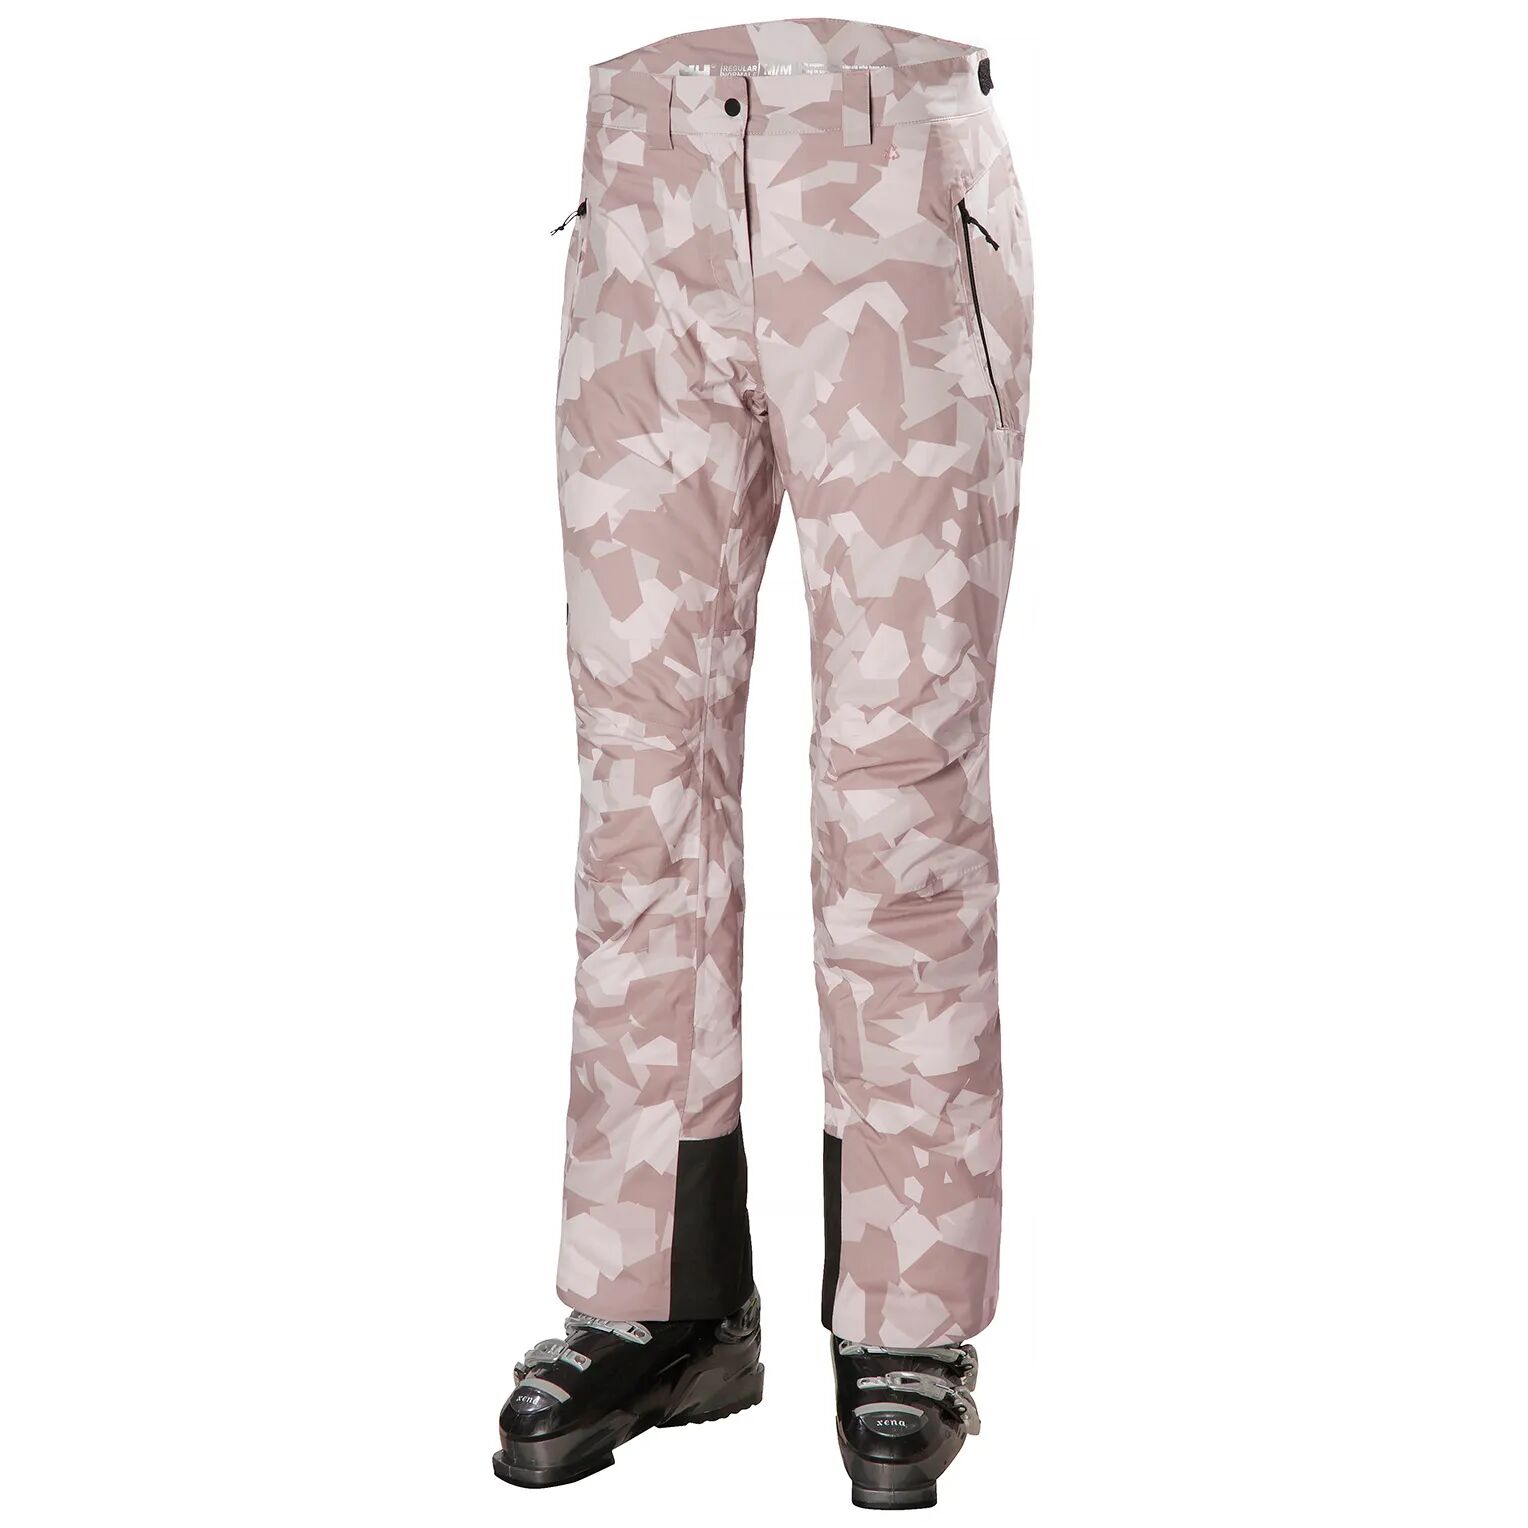 Helly Hansen Dame Snowstar Mono Material Trousers Skibukse Rosa M